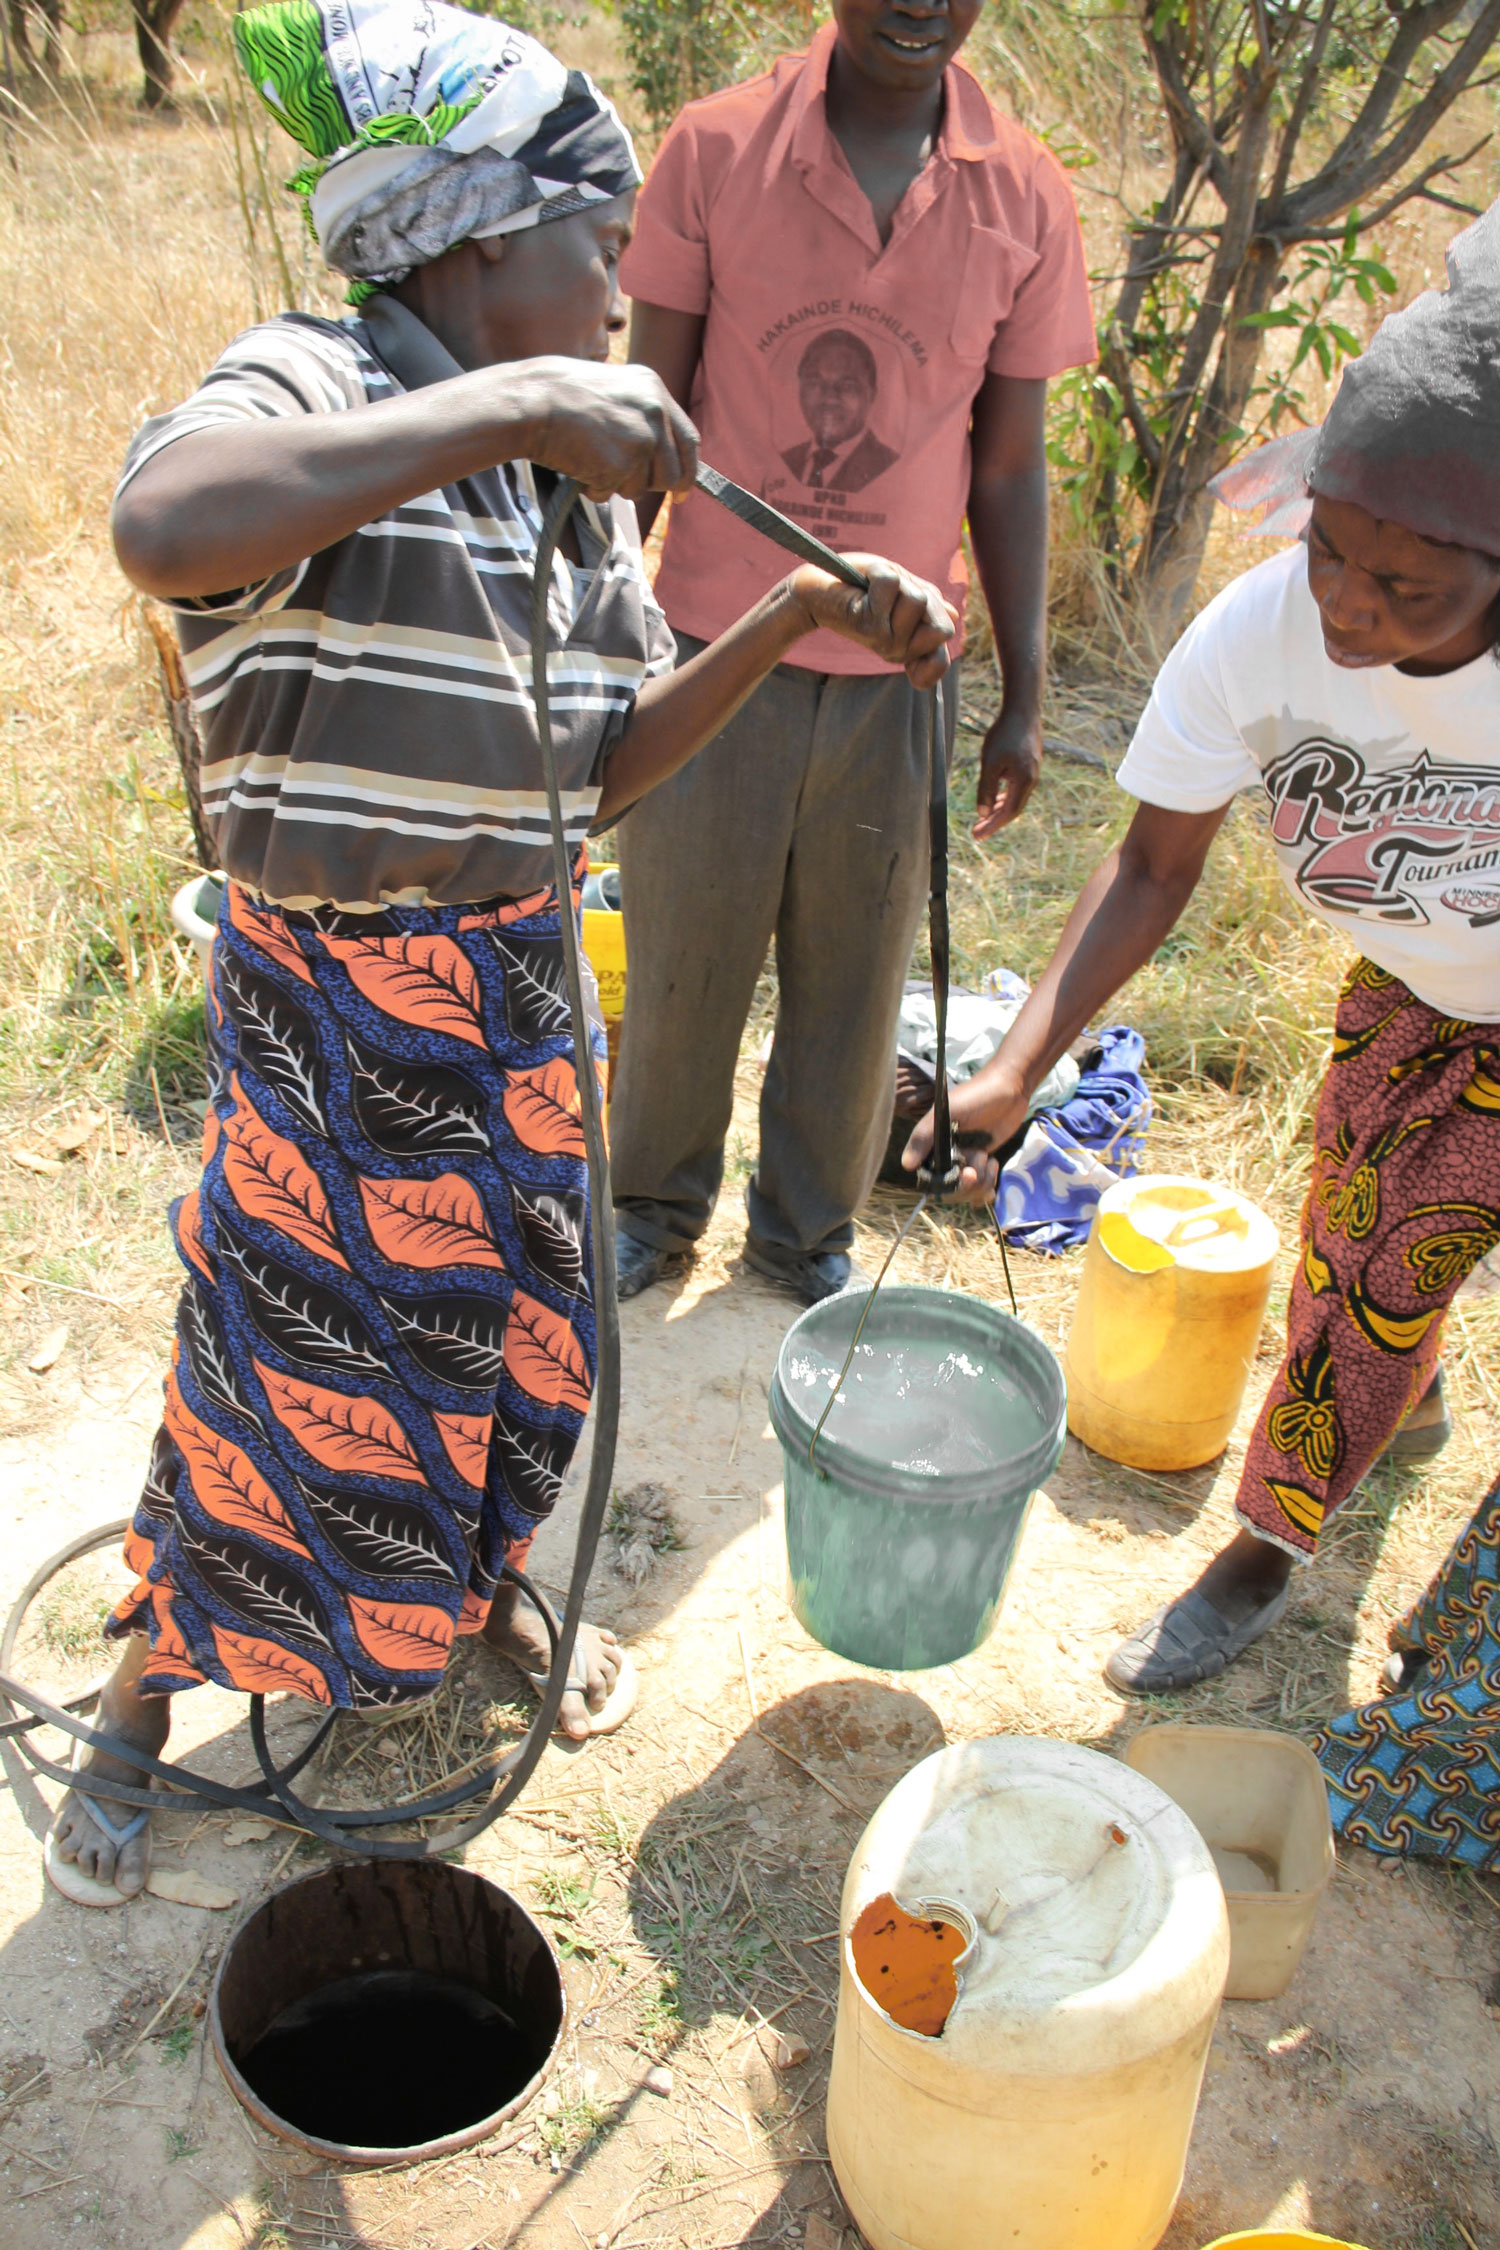  In order to cook for the children and have water for cleaning, the Care Workers have to collect water from the nearby well. 